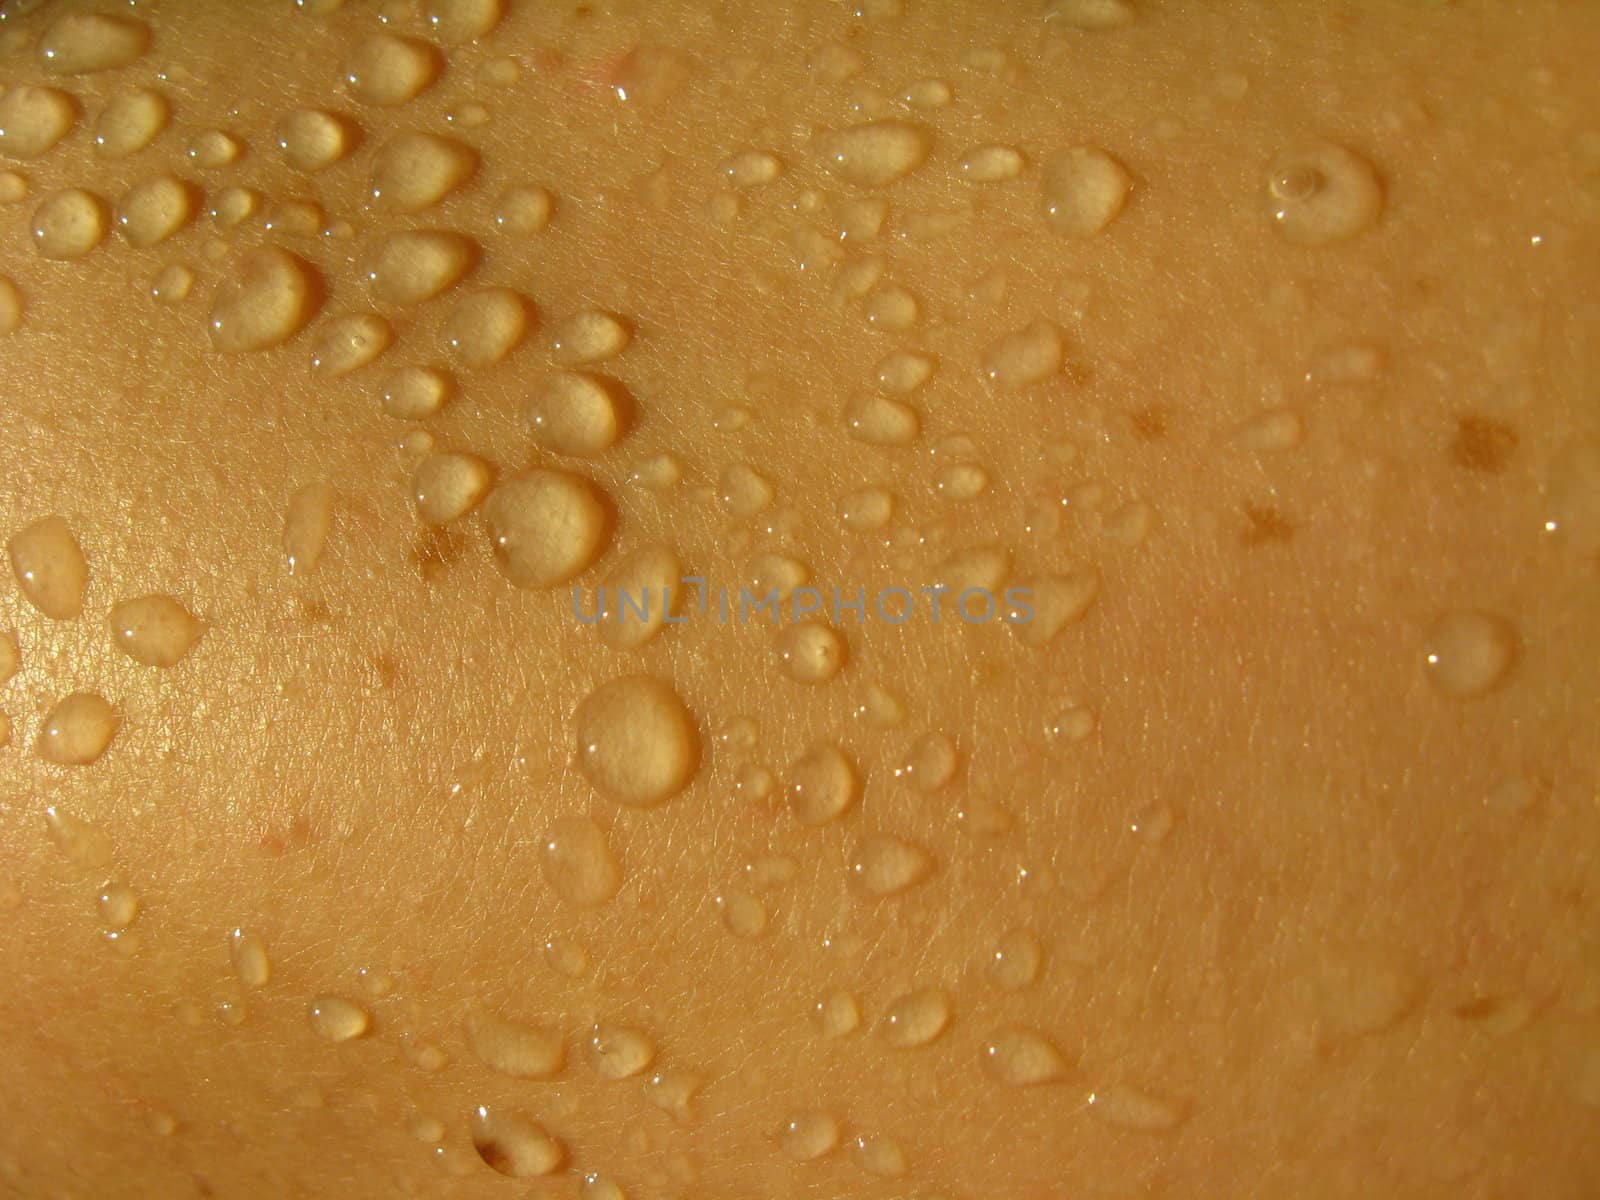 the surface of a human skin with droplets of water